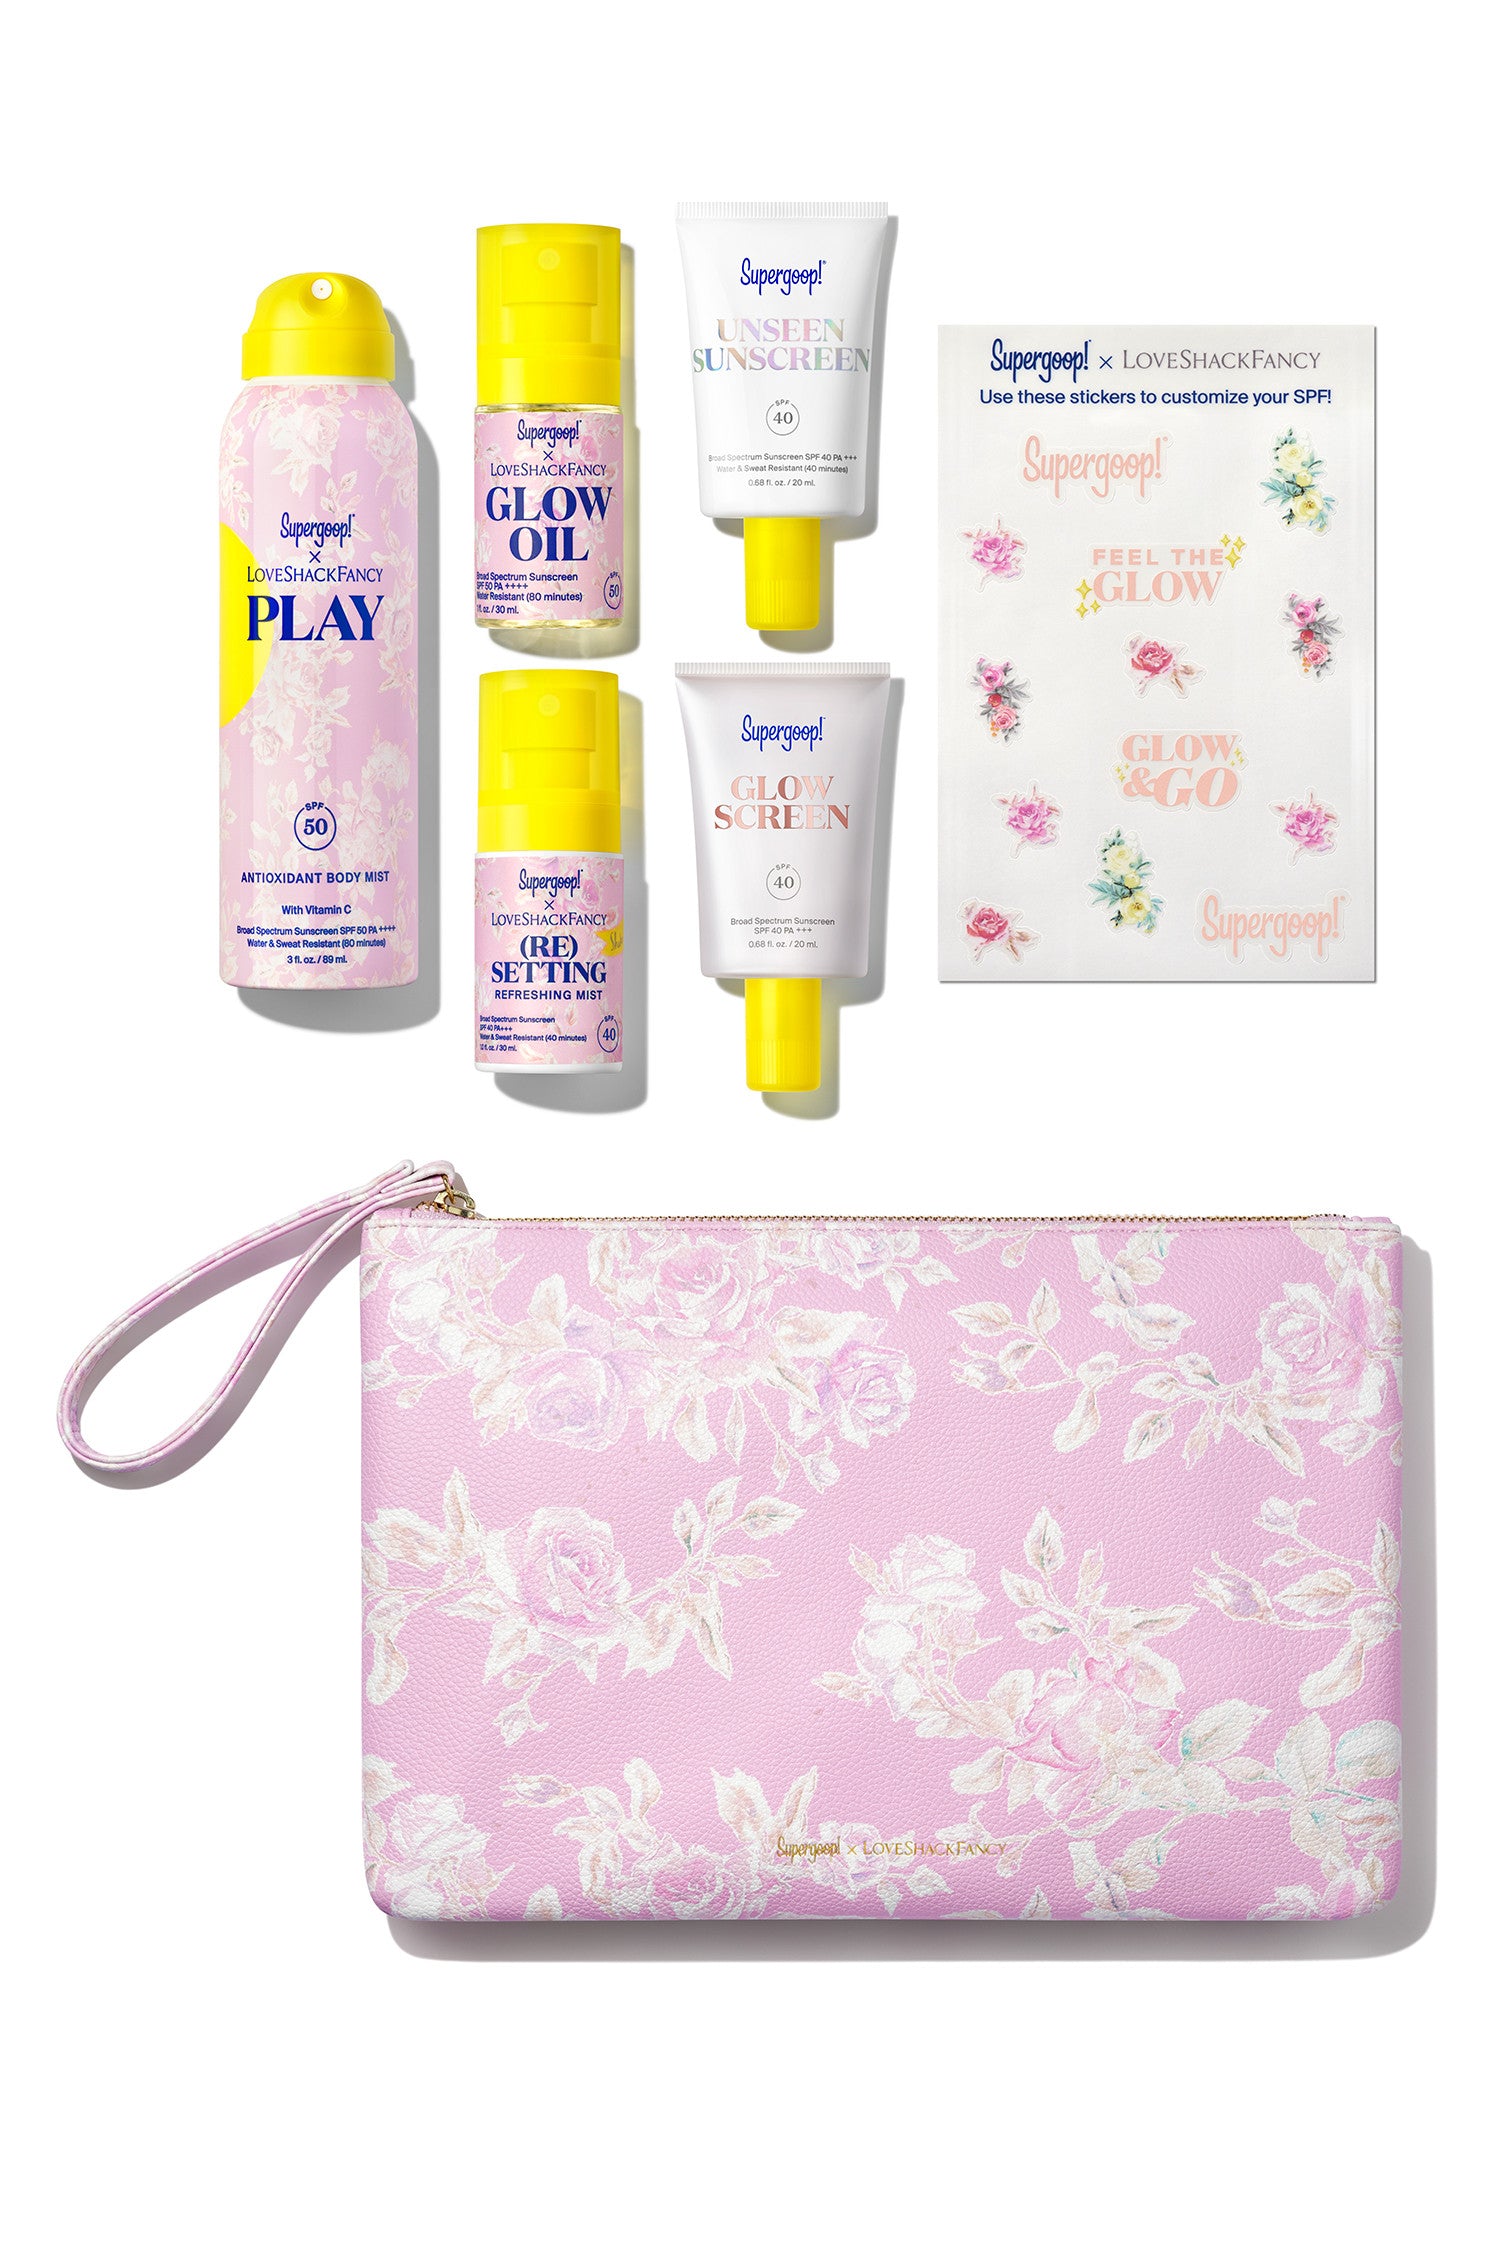 5 Supergoop products in LSF Florals with LSF floral leather pouch and sticker set